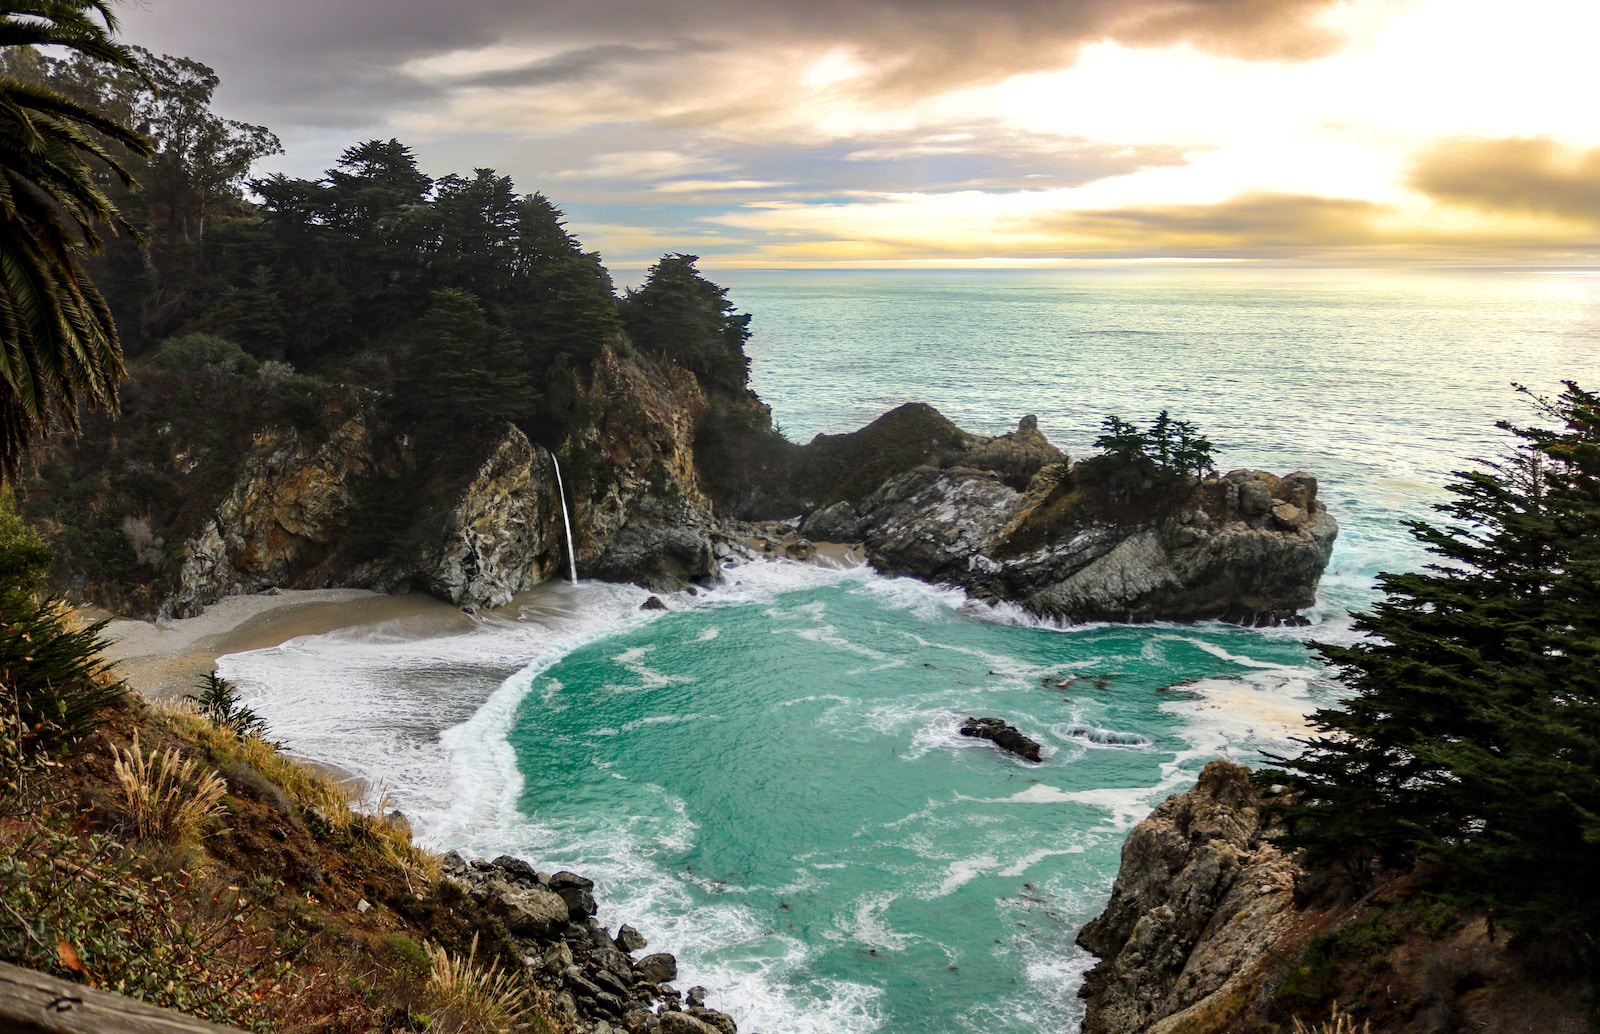 Luxury Getaway in Big Sur: A 4-Day Vacation Guide